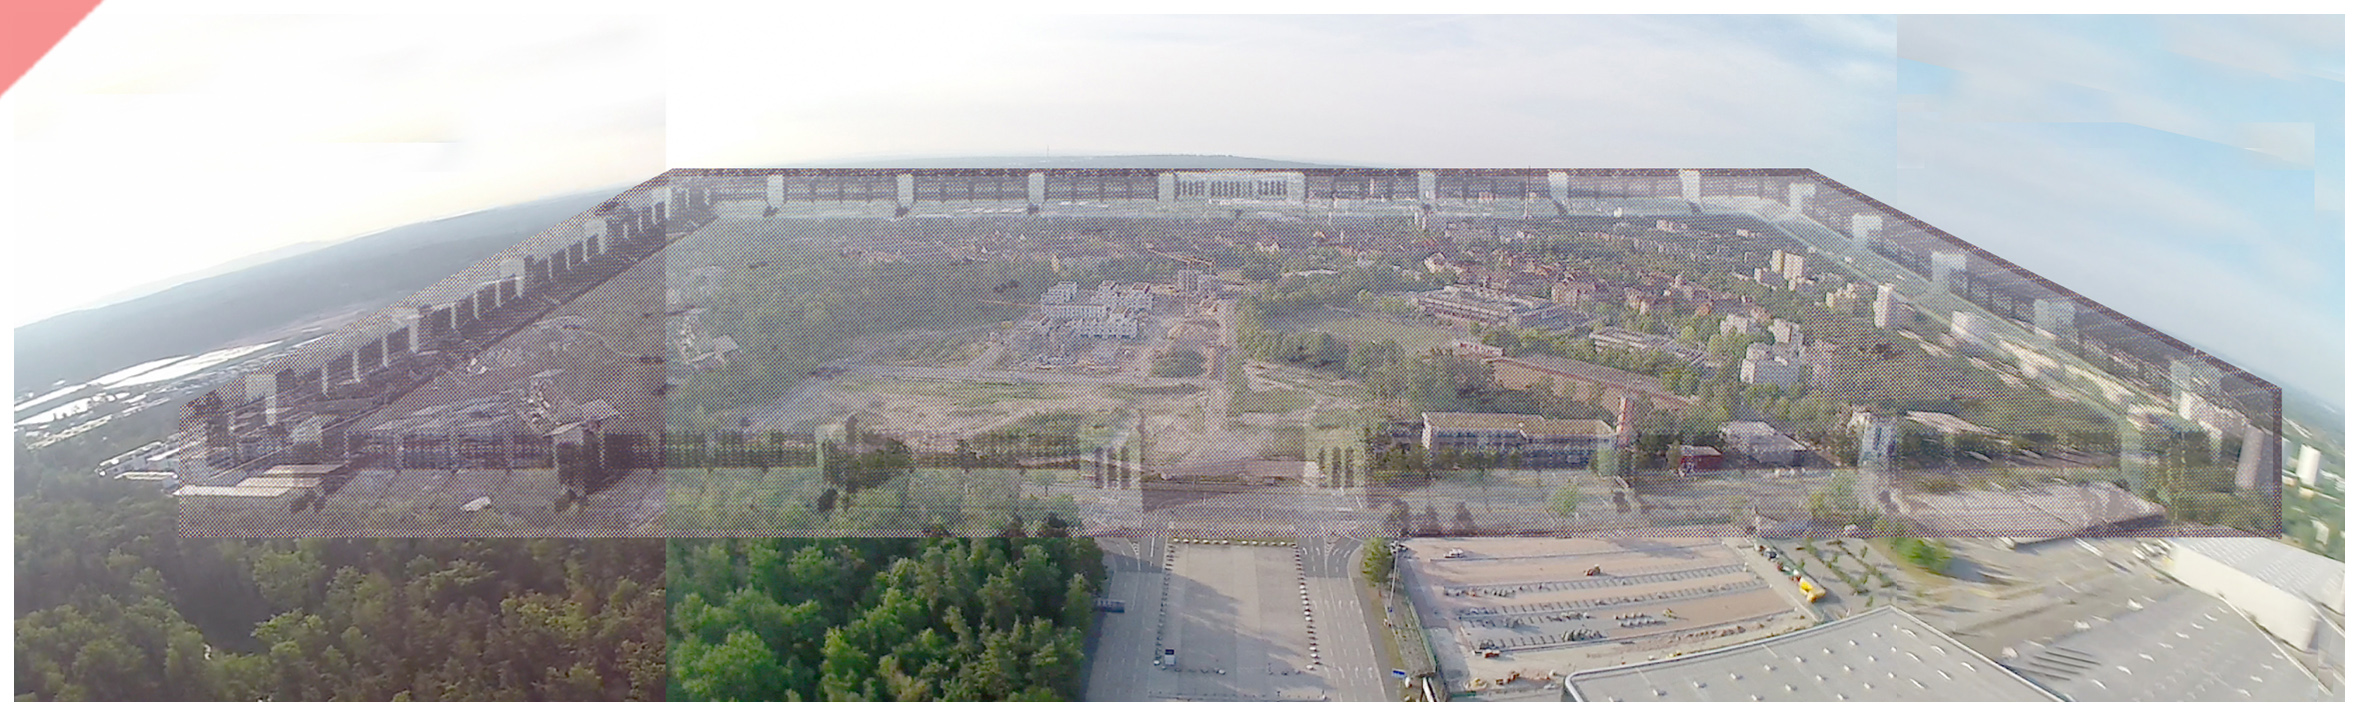 March-field-Nuremberg-Party-Rally-Grounds-drone-flight-Superimposing-Now-Then